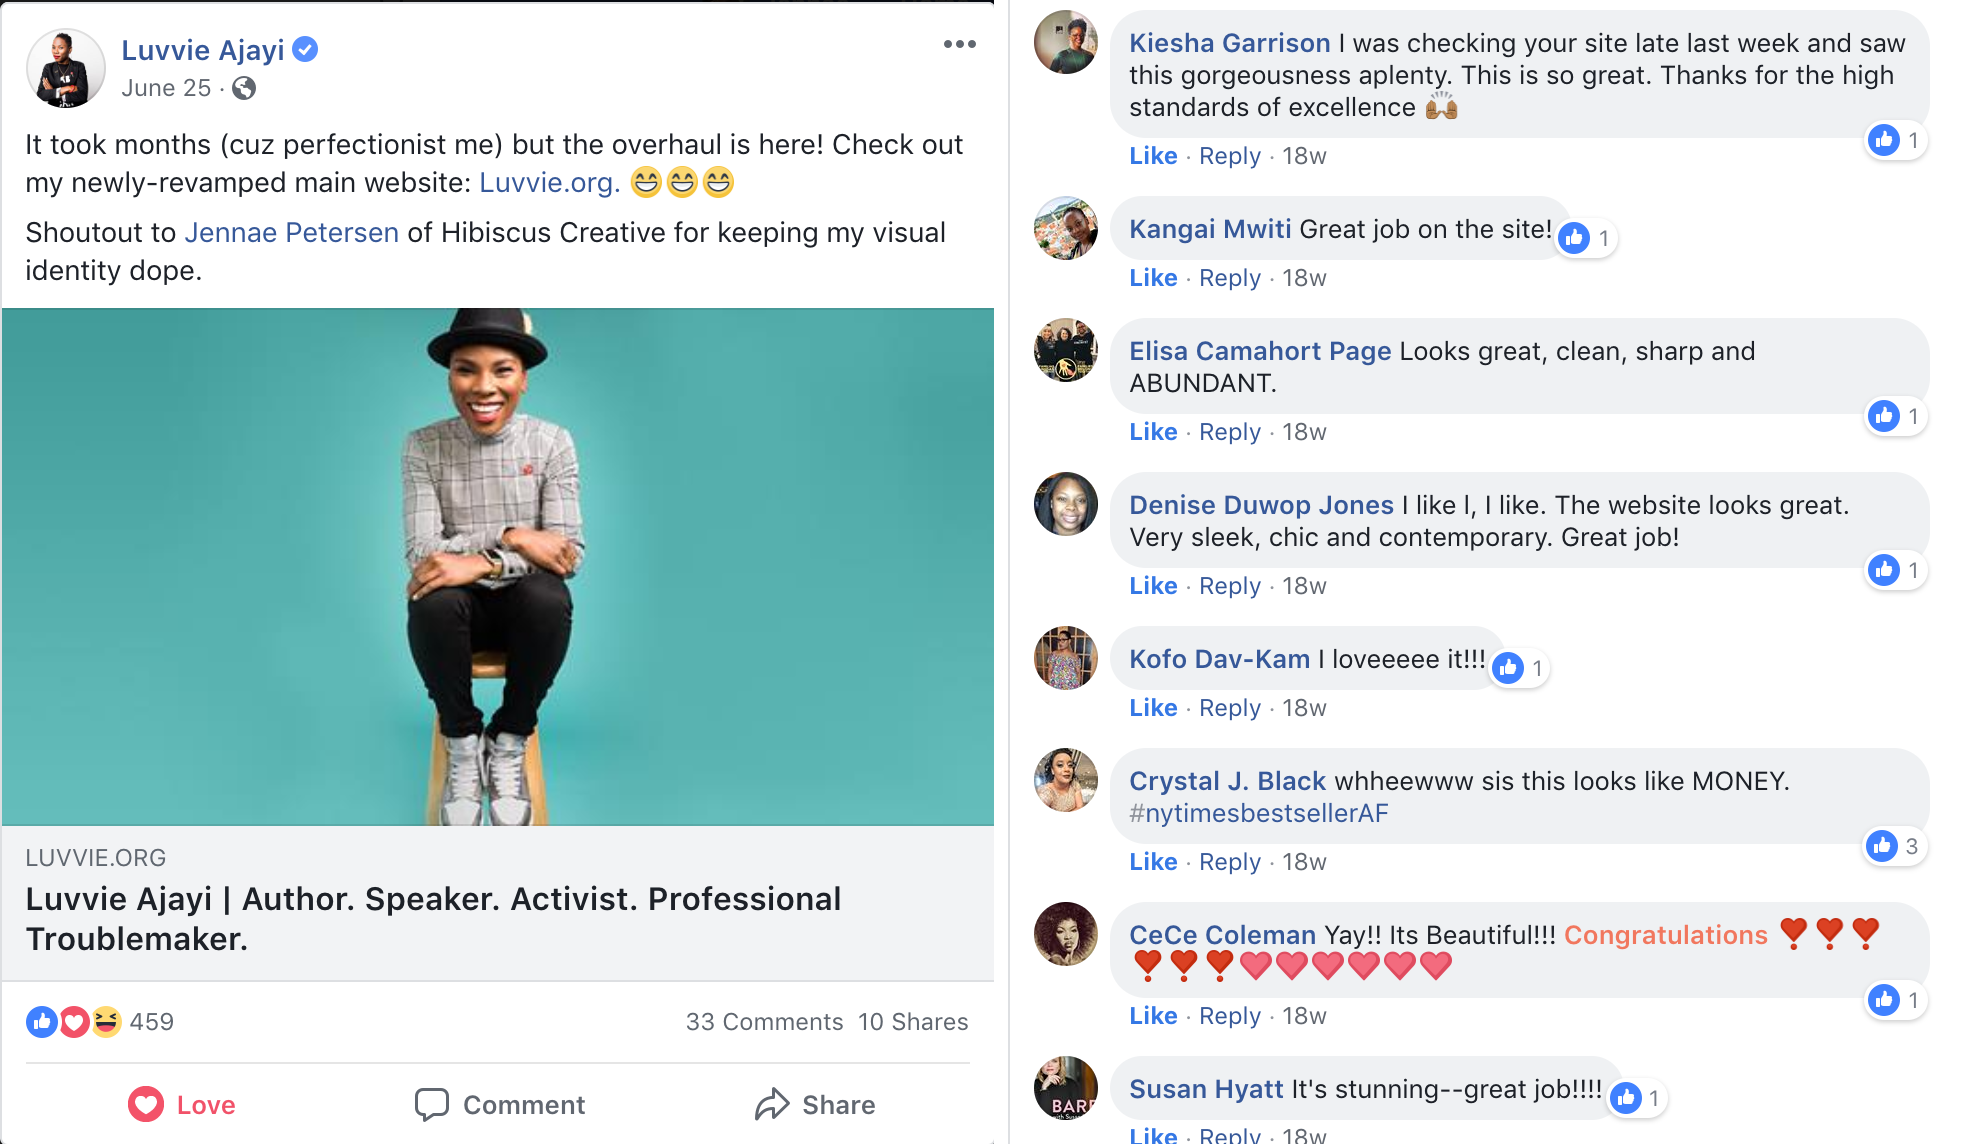 Facebook post by Luvvie Ajayi praising the work of Jennae Petersen and Blue Agate Creative, along with comments of praise from Luvvie's audience